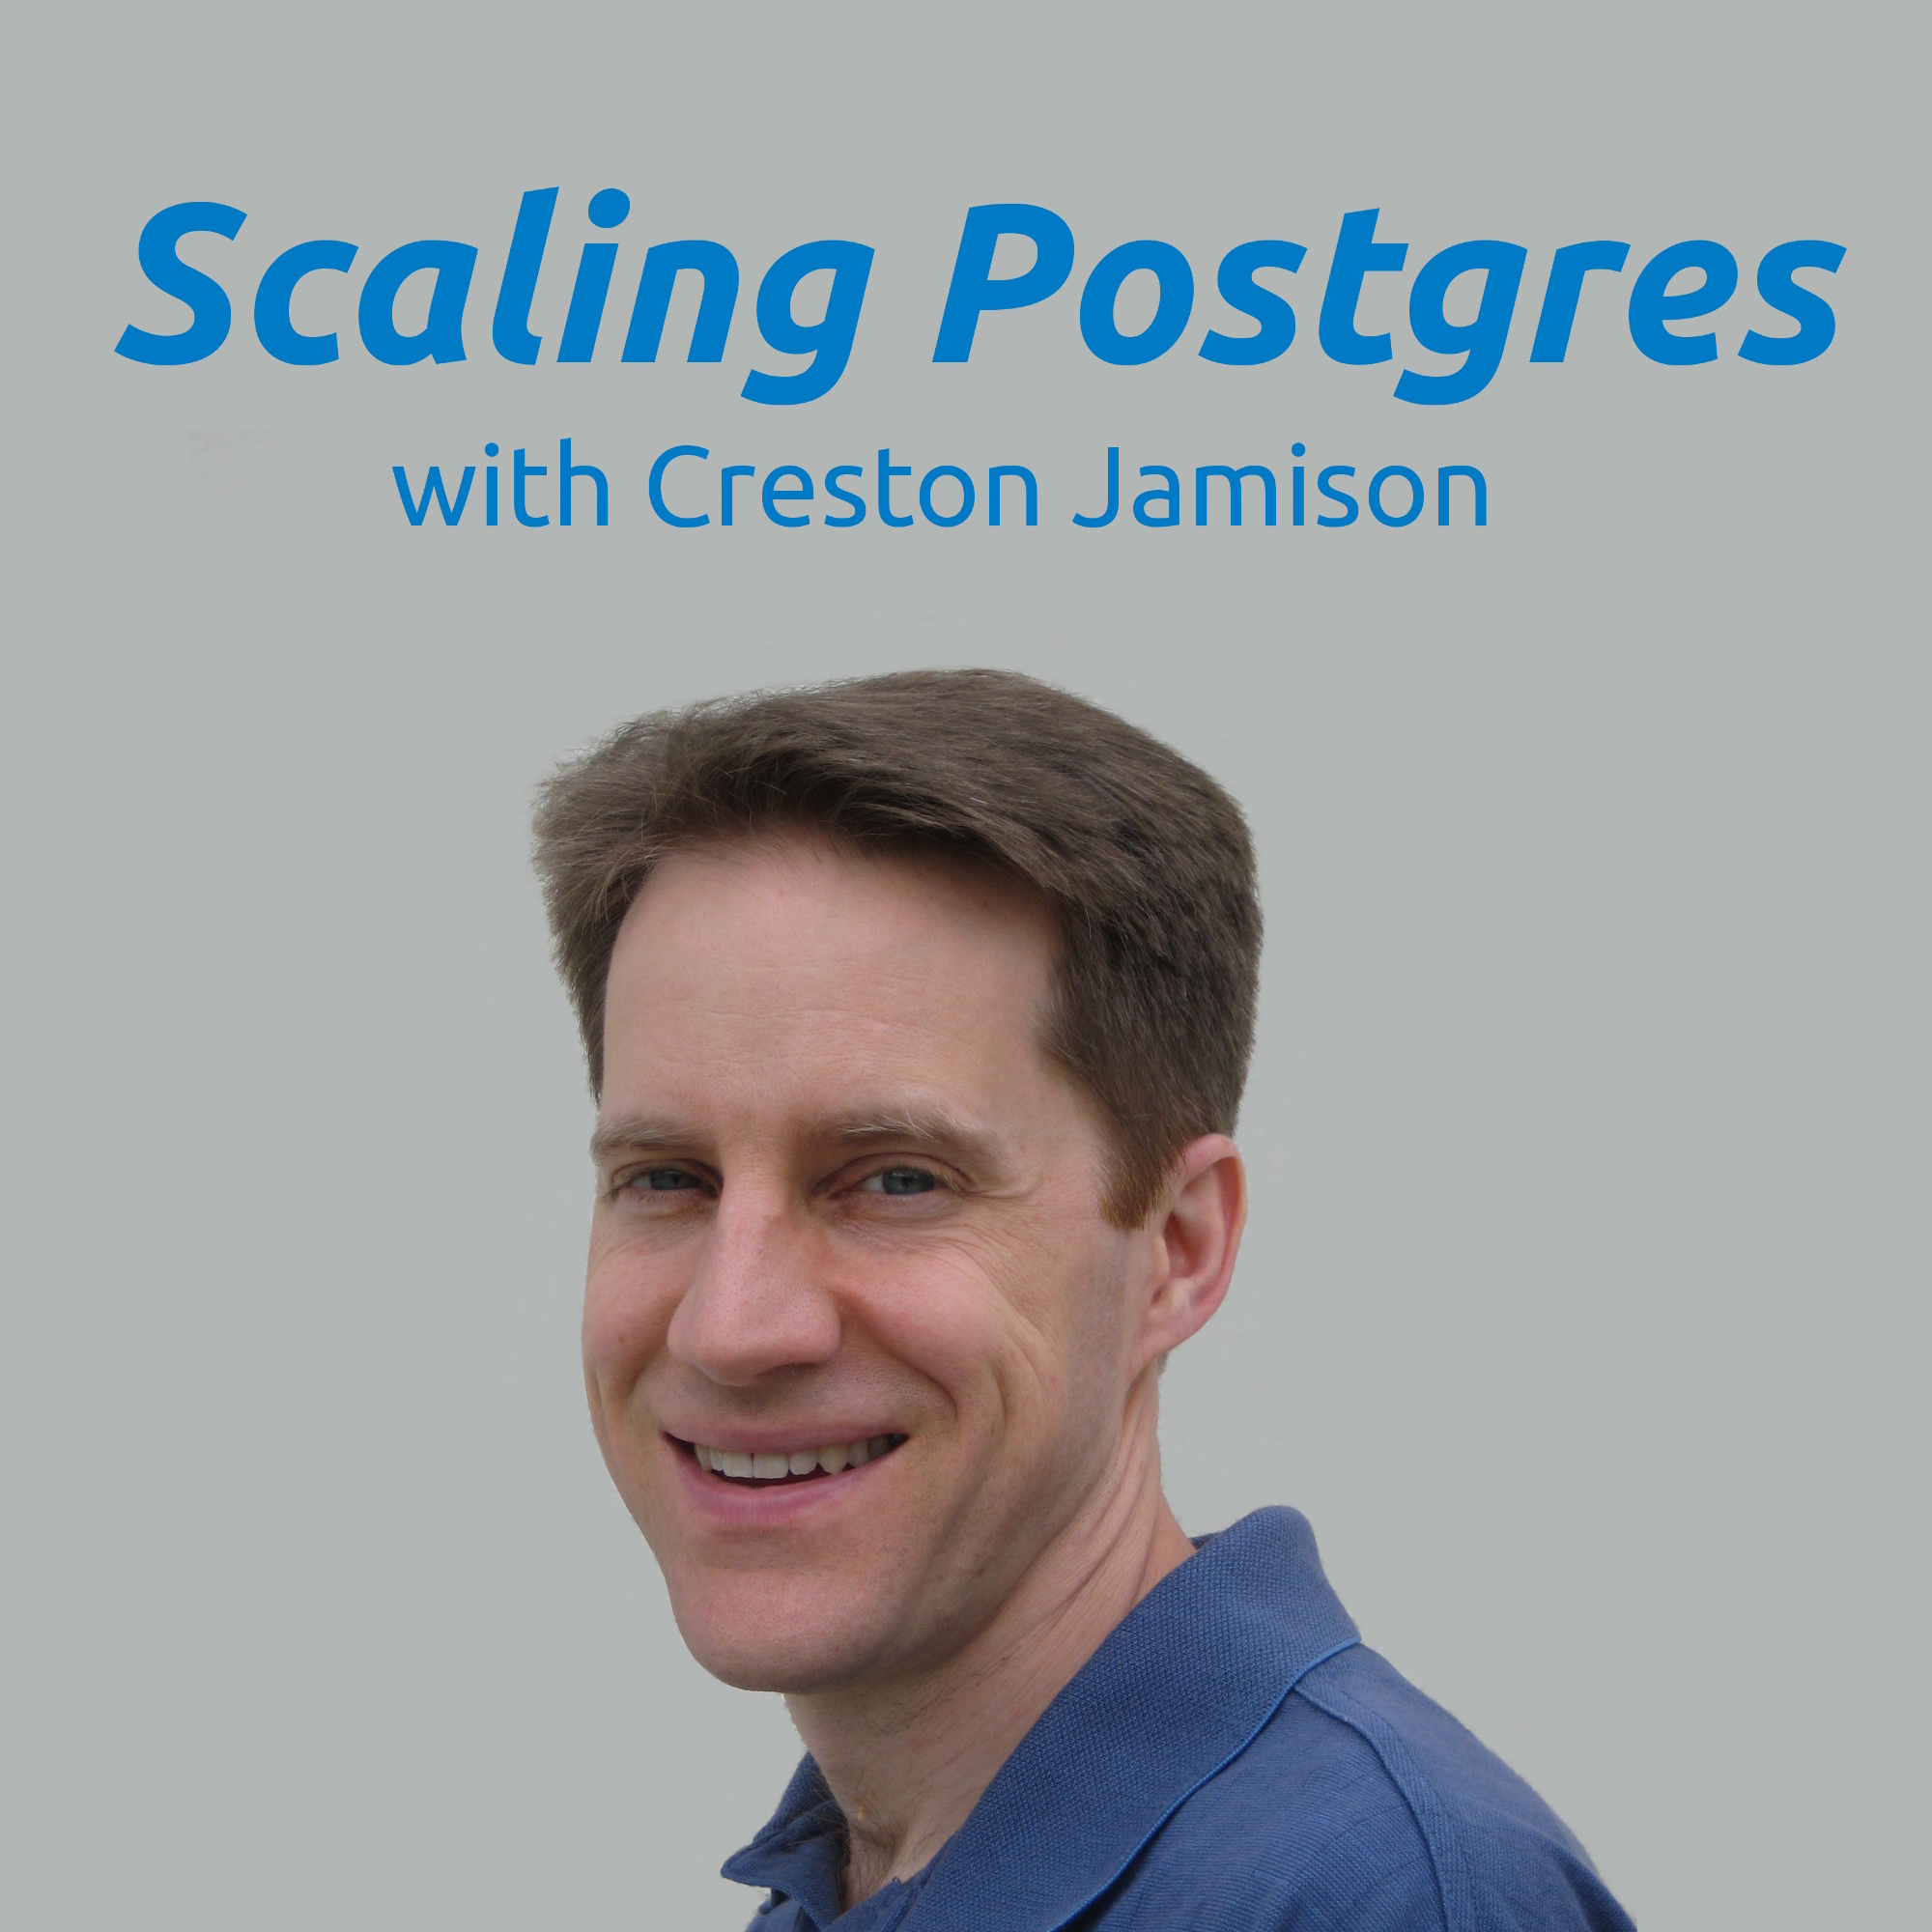 Postgres 11, Multi-tenant Scale, Trigger Speed, Full Text Search | Scaling Postgres 14